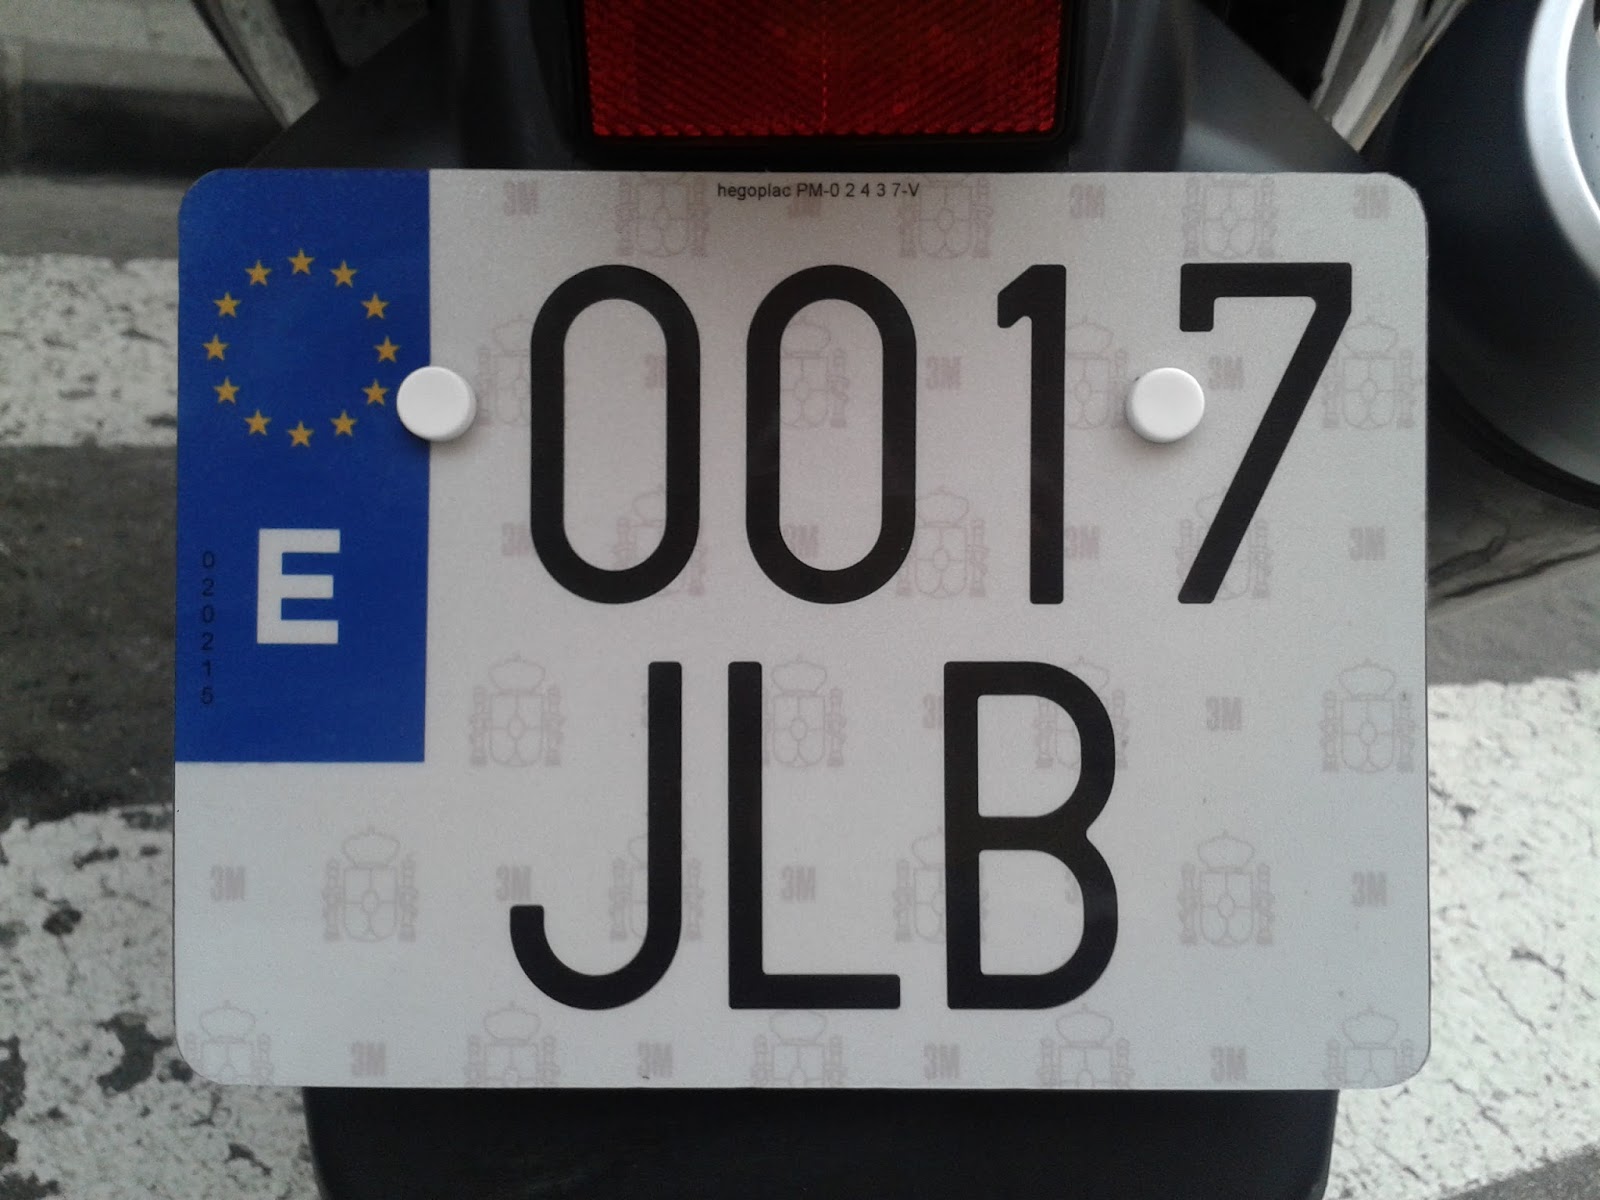 Ovals Plate Pics Motorcycle Plates Of Spain Images, Photos, Reviews